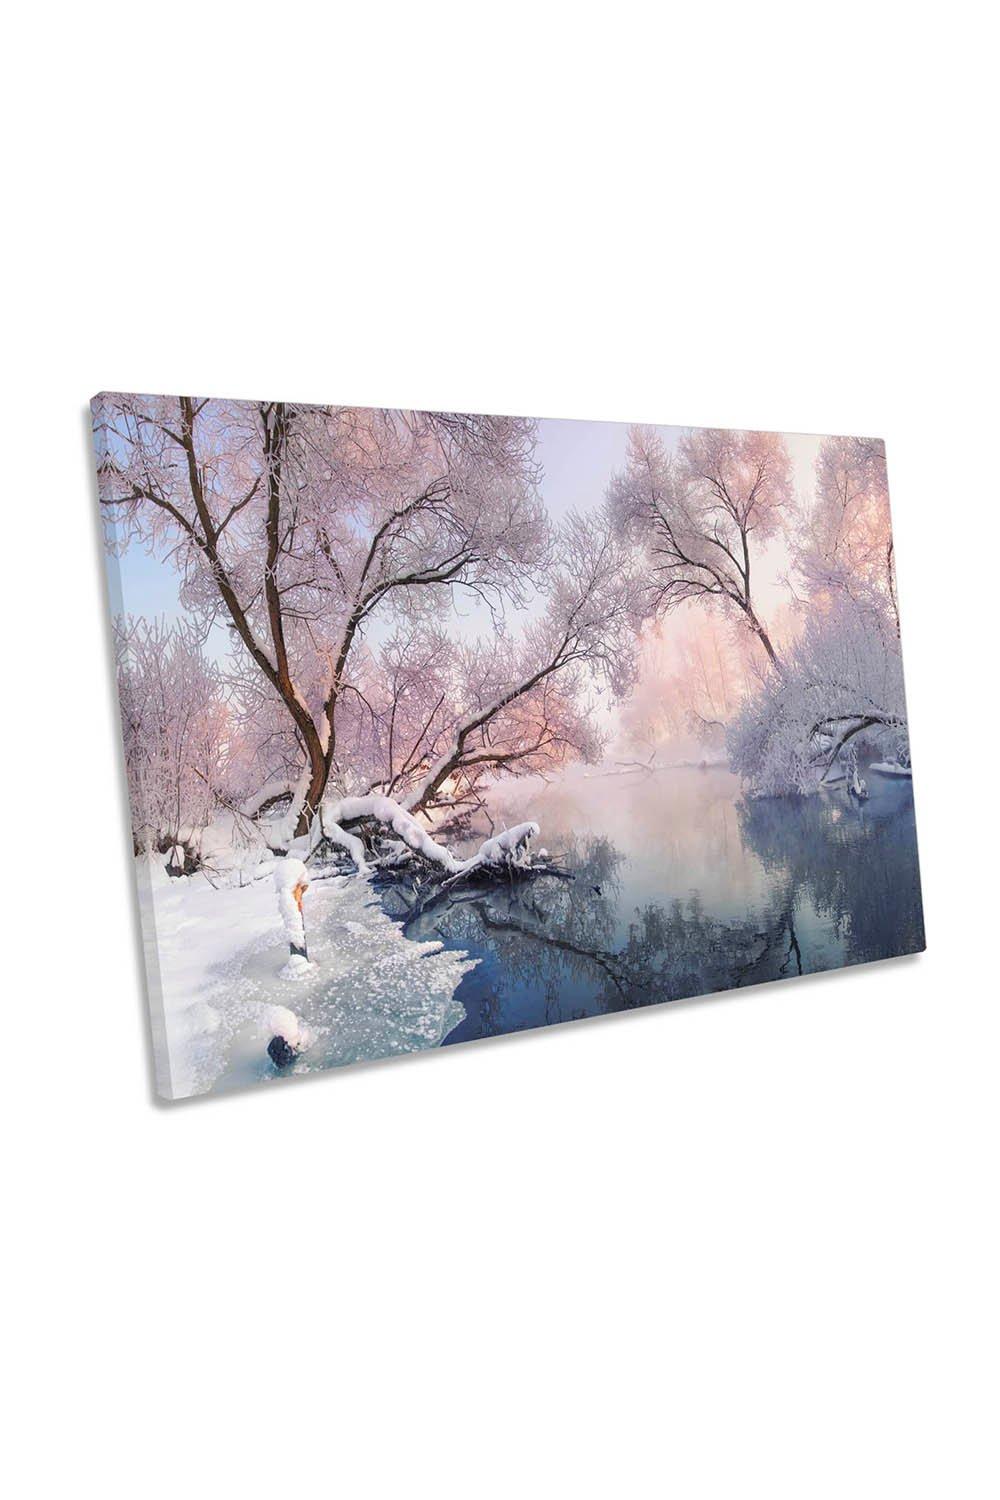 Christmas Lake Winter Landscape Snow Canvas Wall Art Picture Print